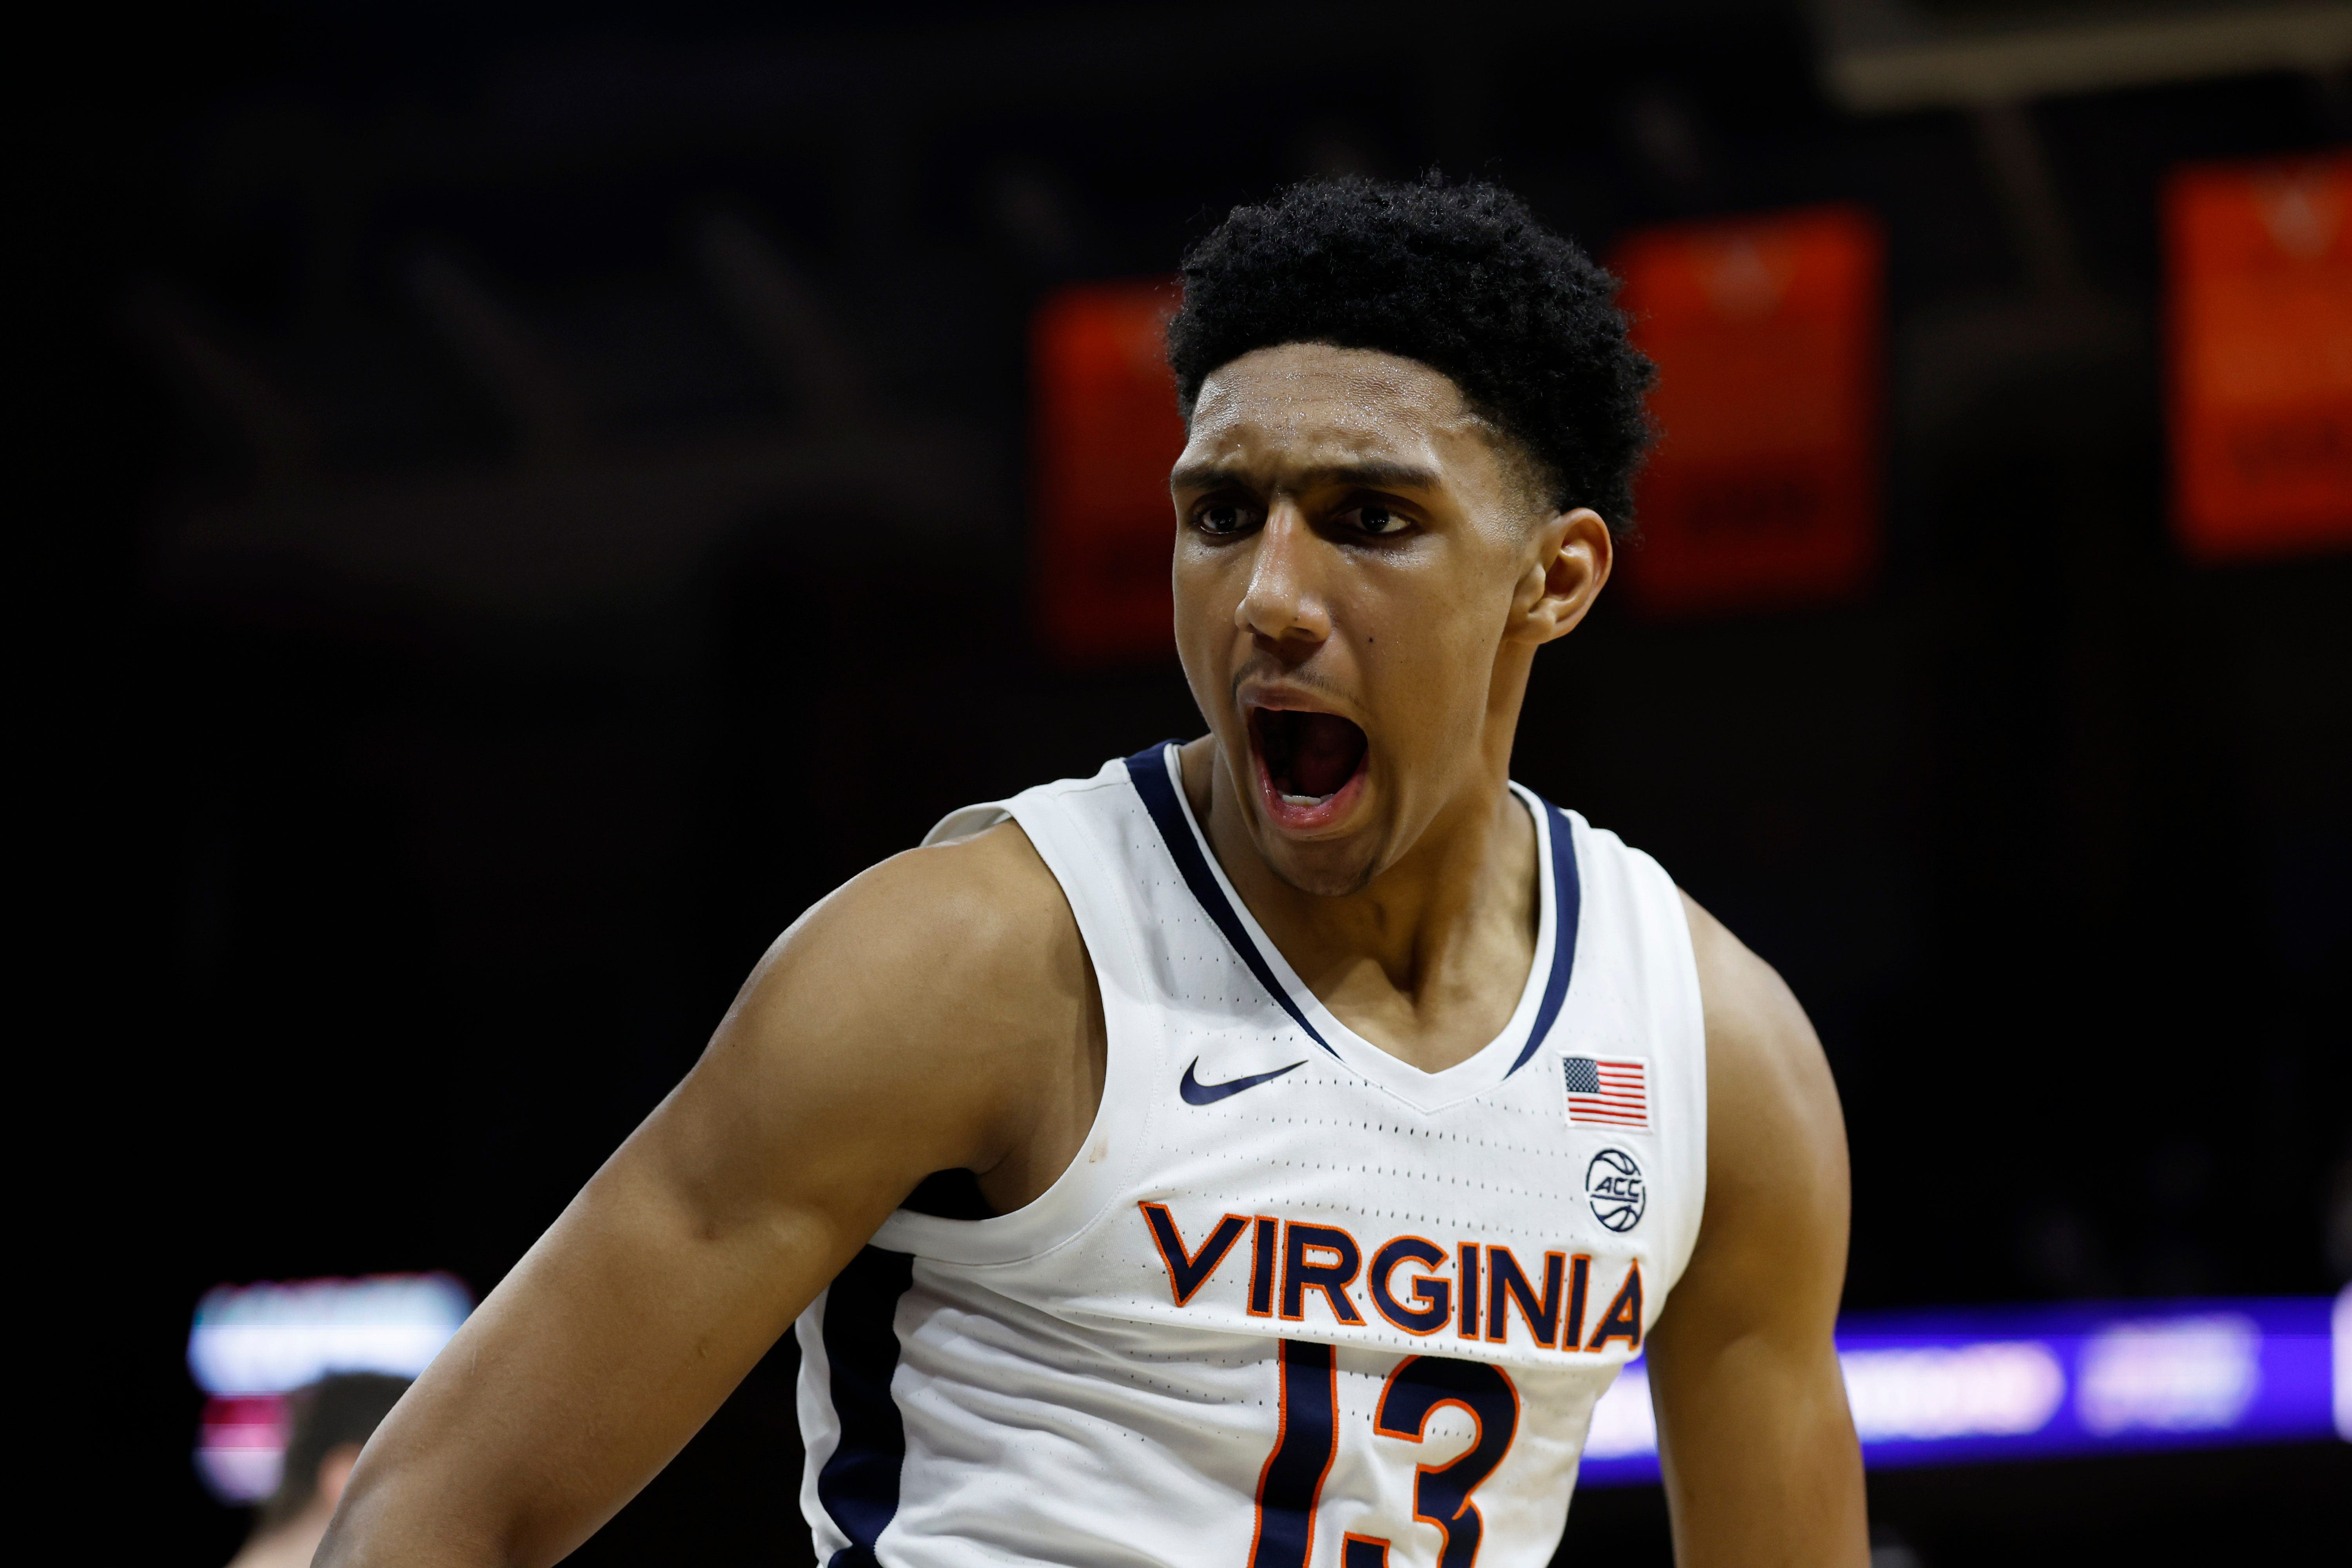 NBA draft 2024 projections have Cleveland Cavaliers focusing on frontcourt help